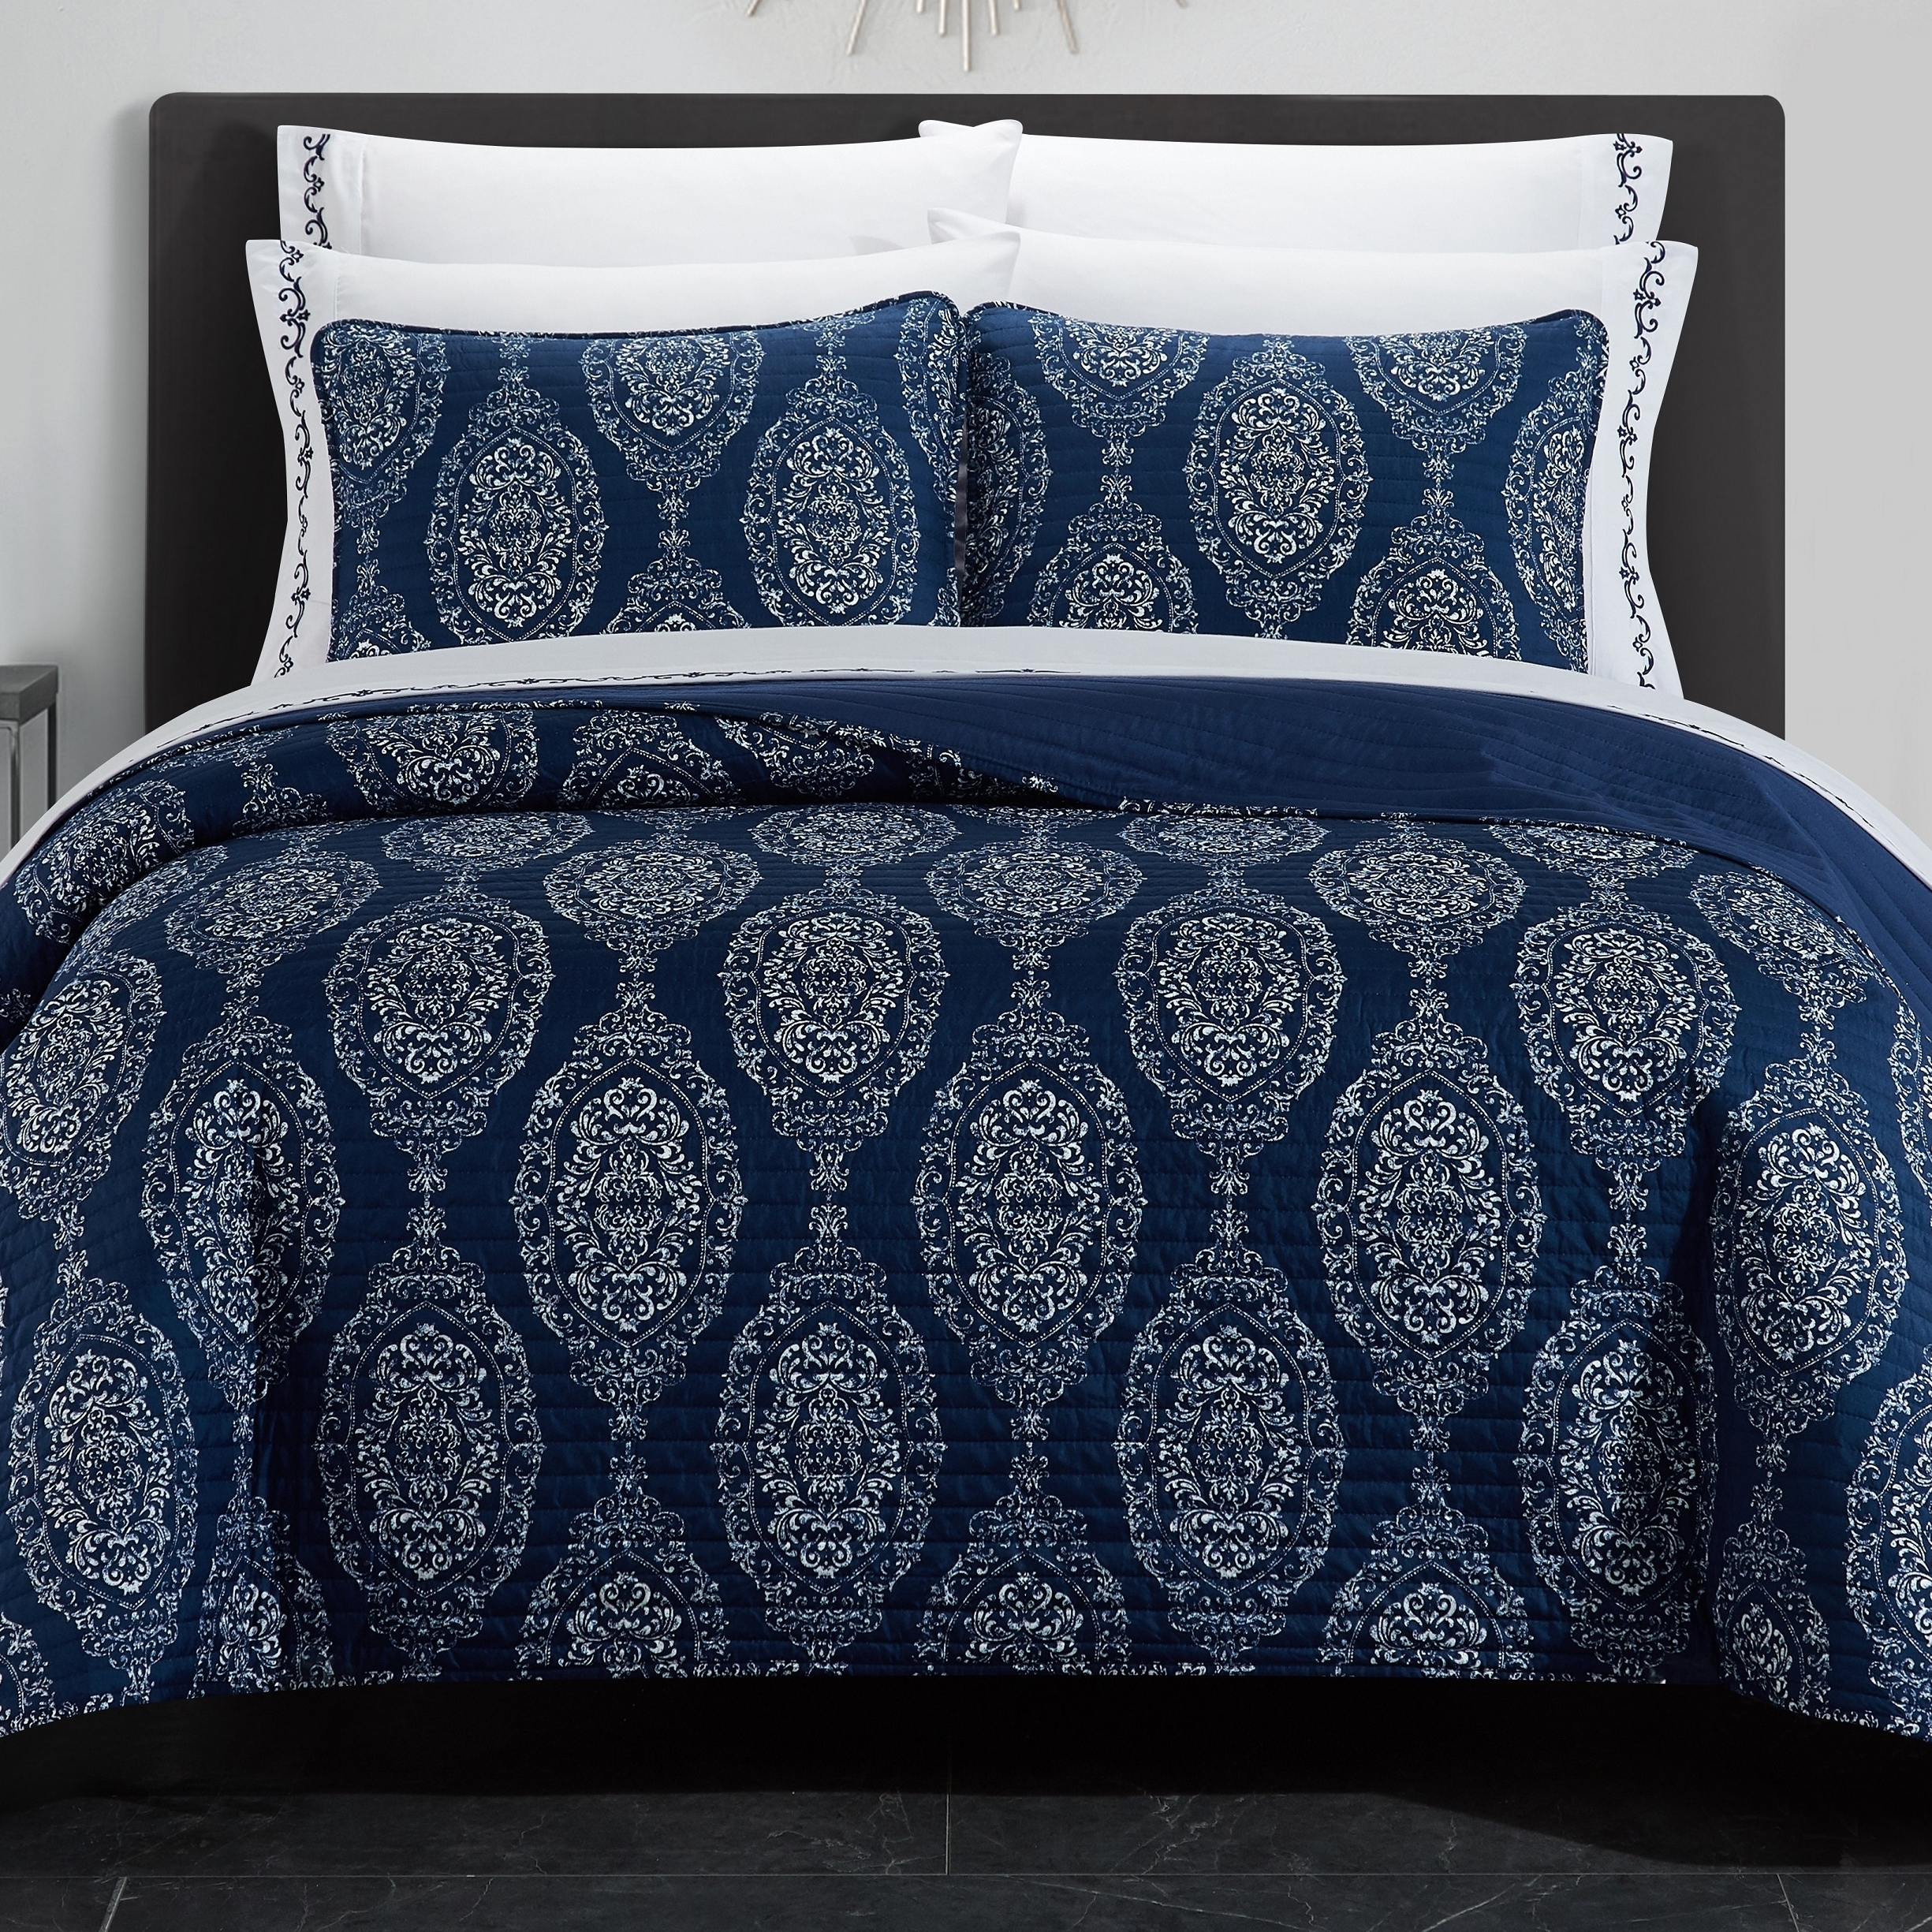 9 Or 6 Piece Quilt Set Medallion Or Floral Pattern Print Reversible Bed In A Bag - Navy, Twin